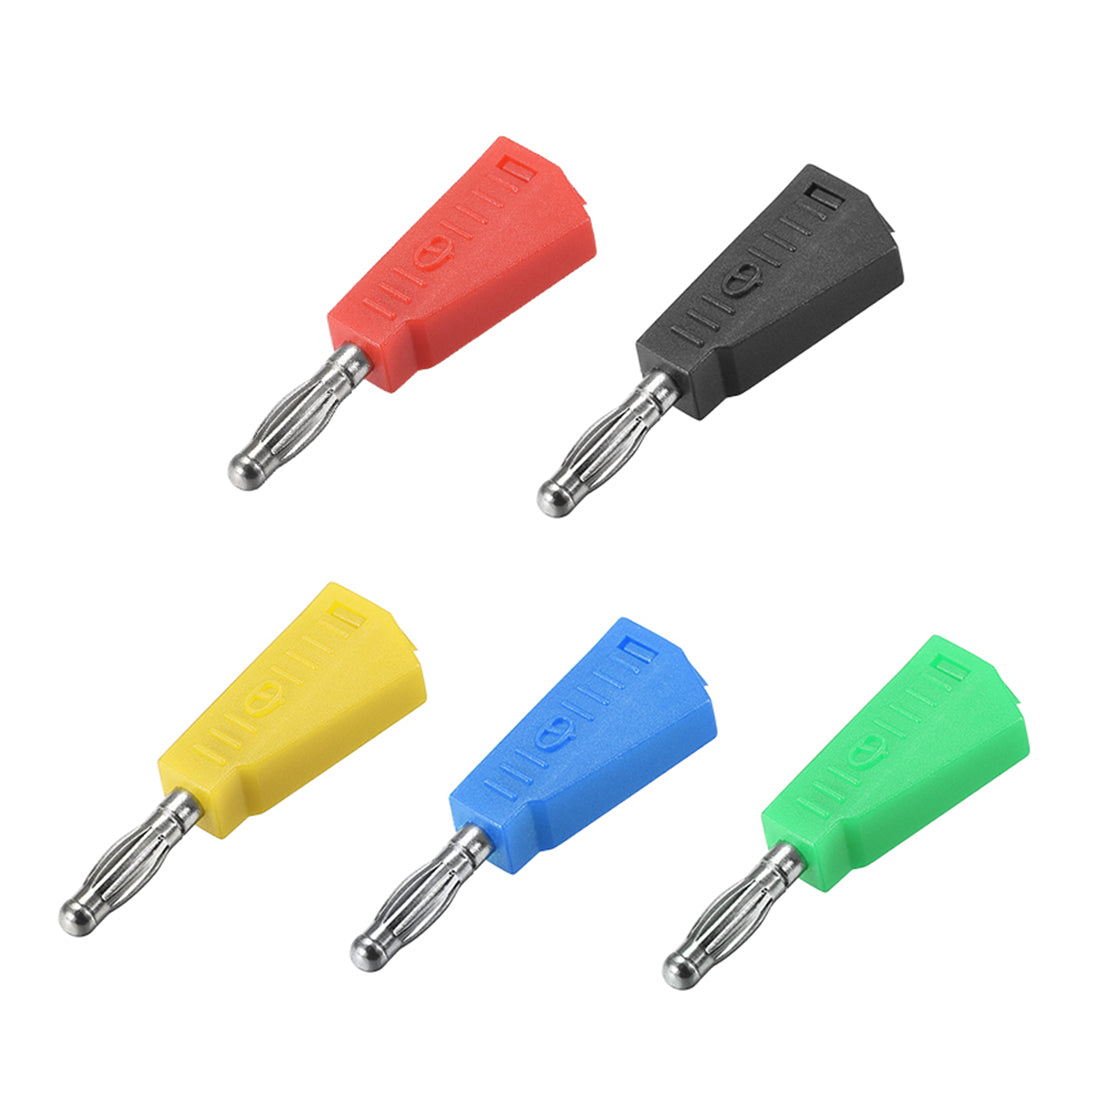 uxcell Uxcell 4mm Banana Speaker Wire Cable Plugs Connectors 5 Colors 20A Jack Connector 10pcs